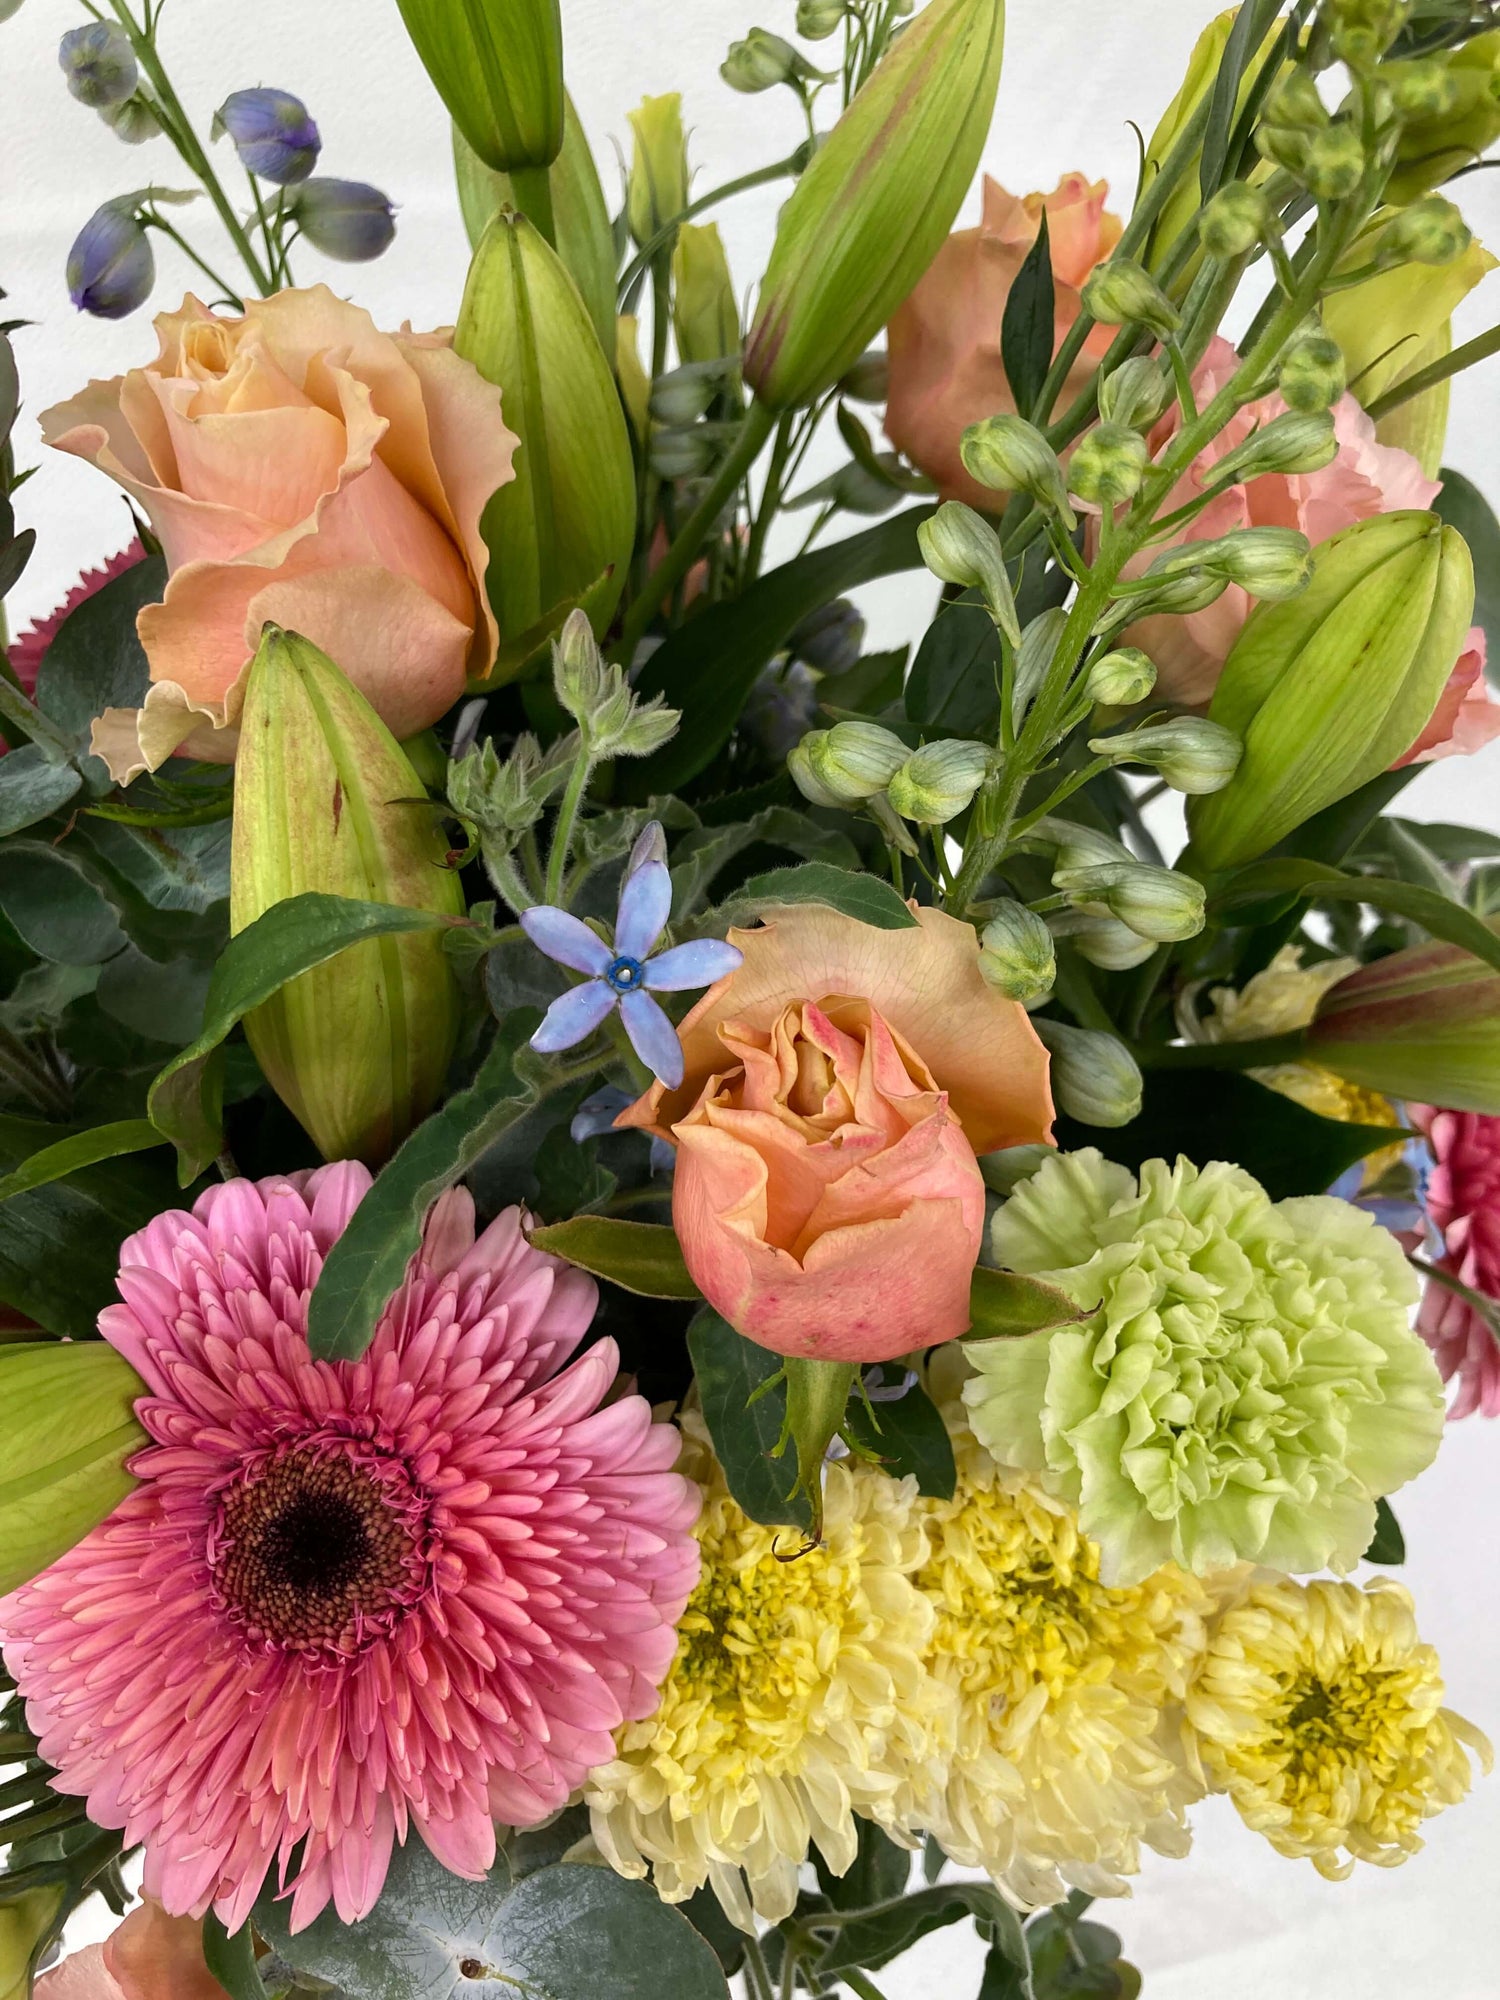 Subtle flowers as well as bright flowers are perfect for wishing someone well. Something our Pastel Bouquet achieves.